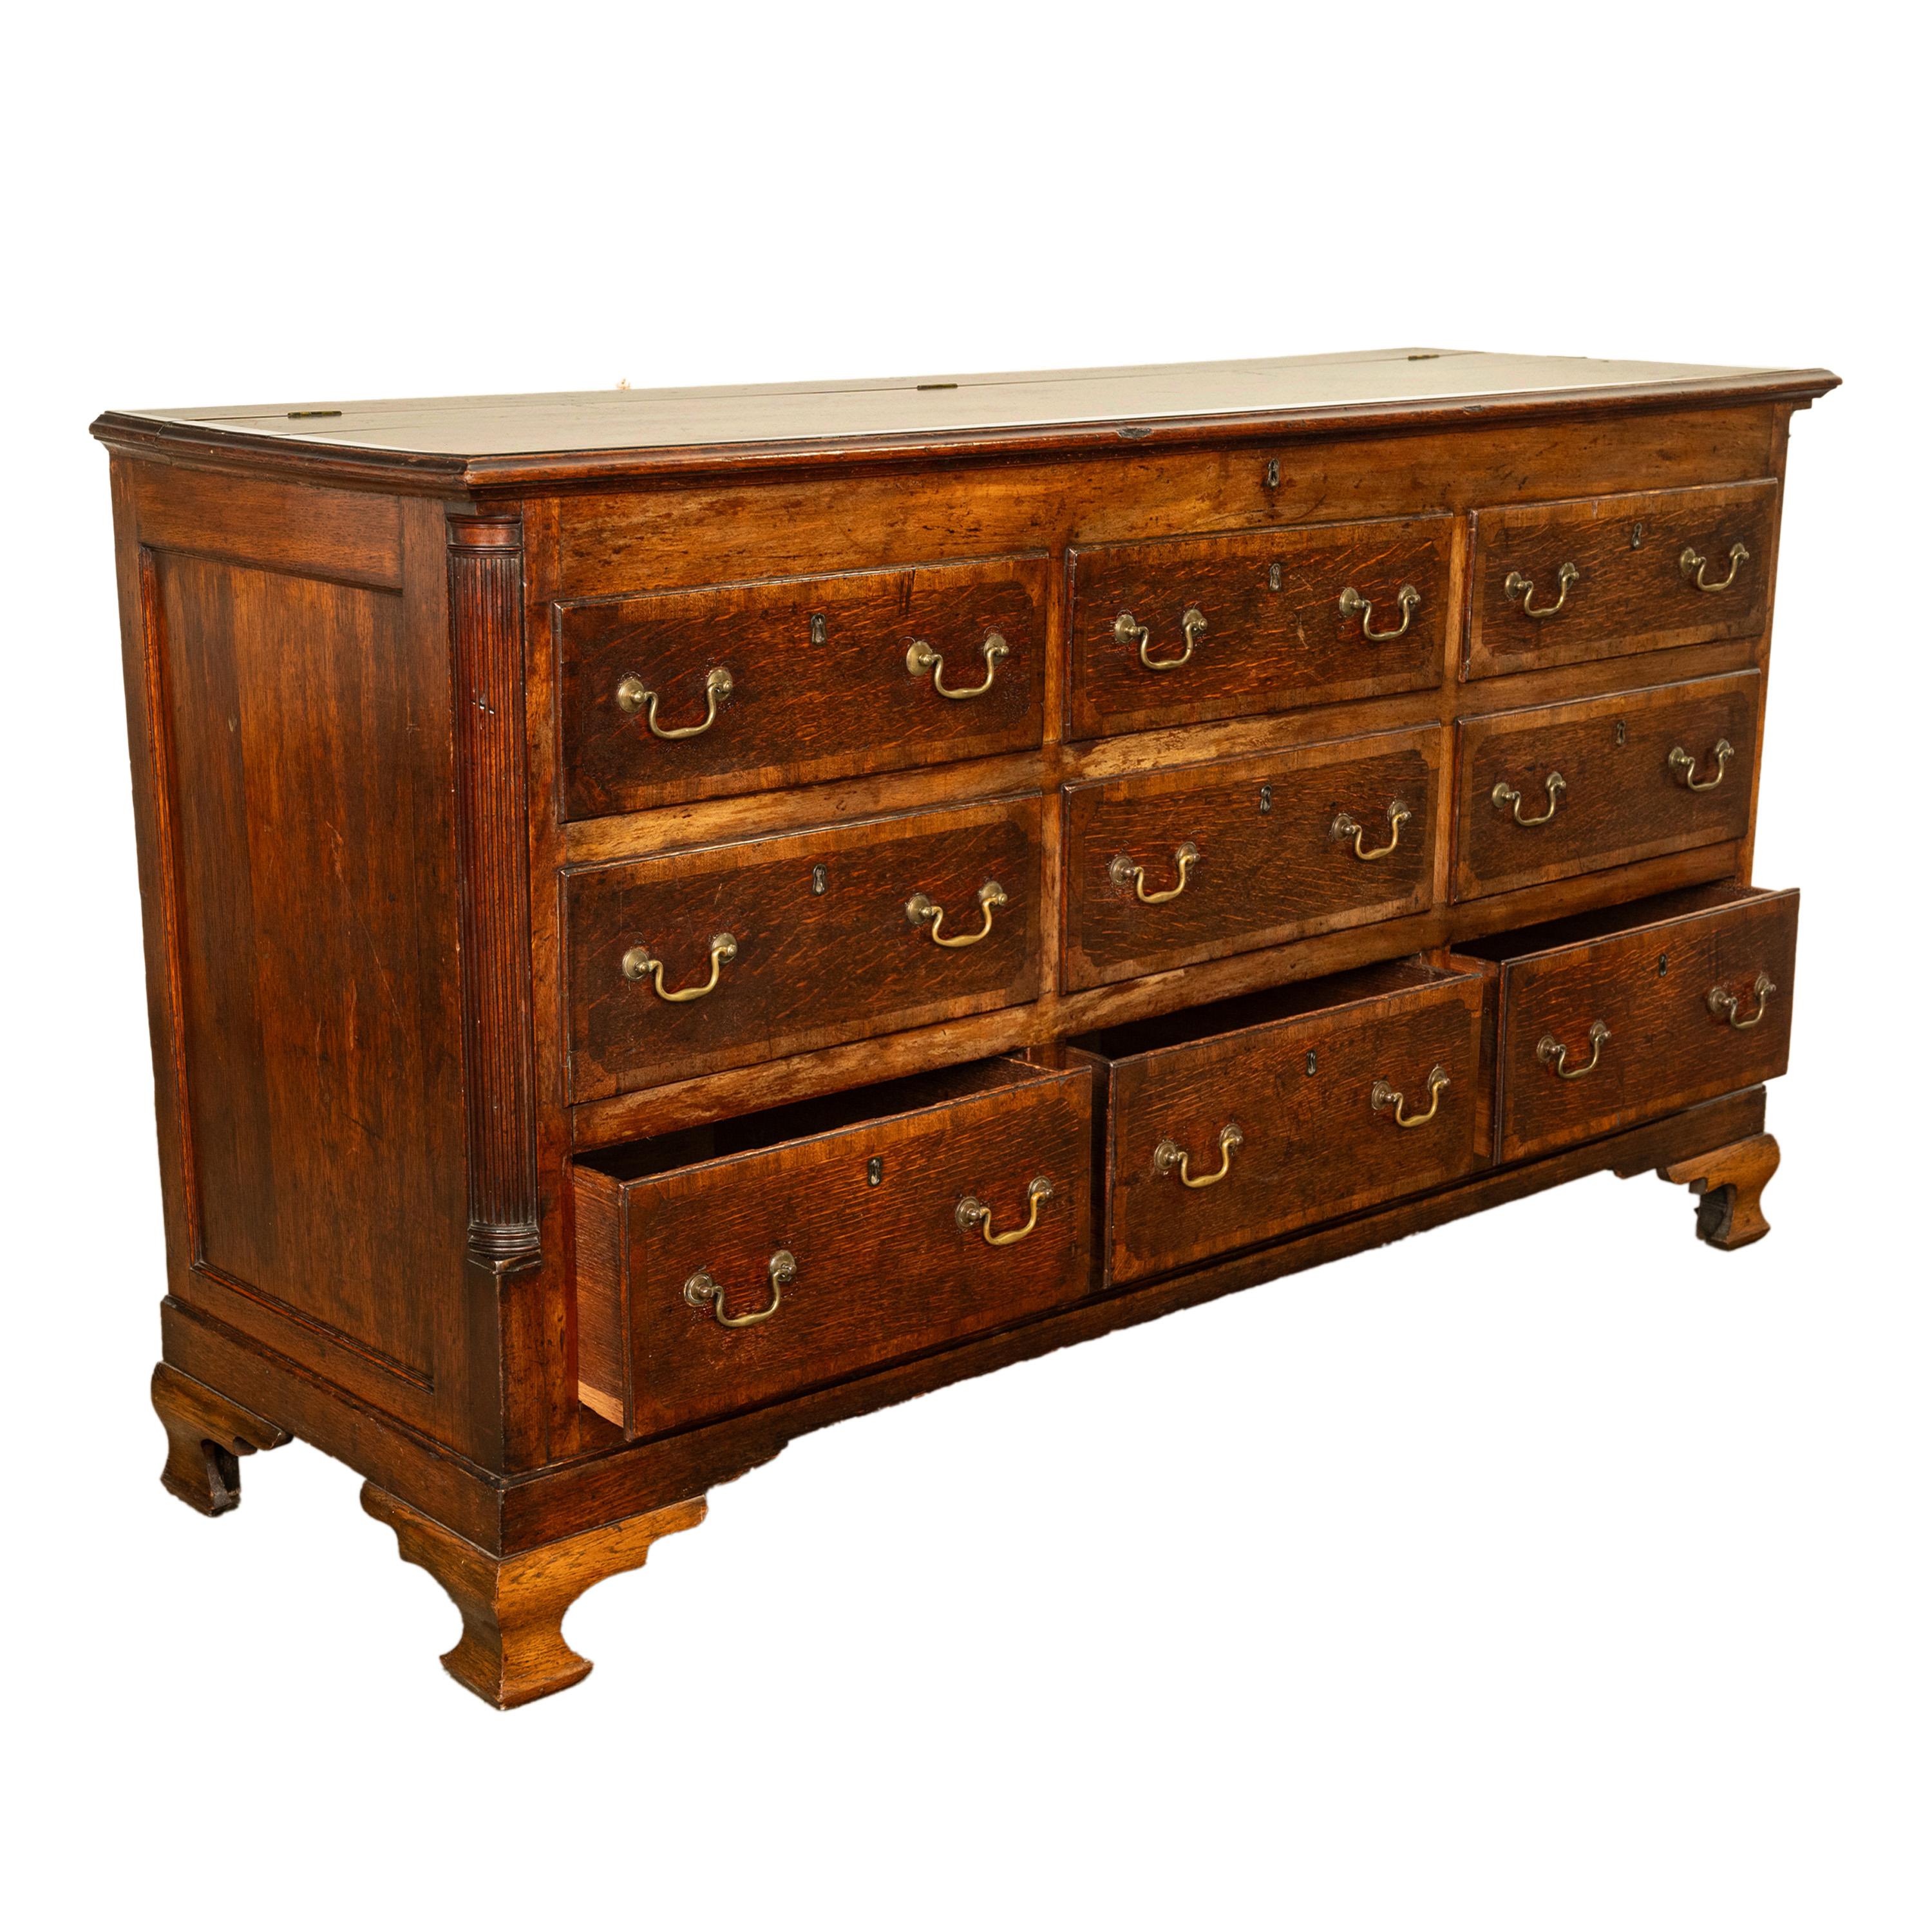 Antique 18th C Georgian Oak Mahogany Hinged Top Mule Chest Coffer Sideboard 1770 For Sale 5